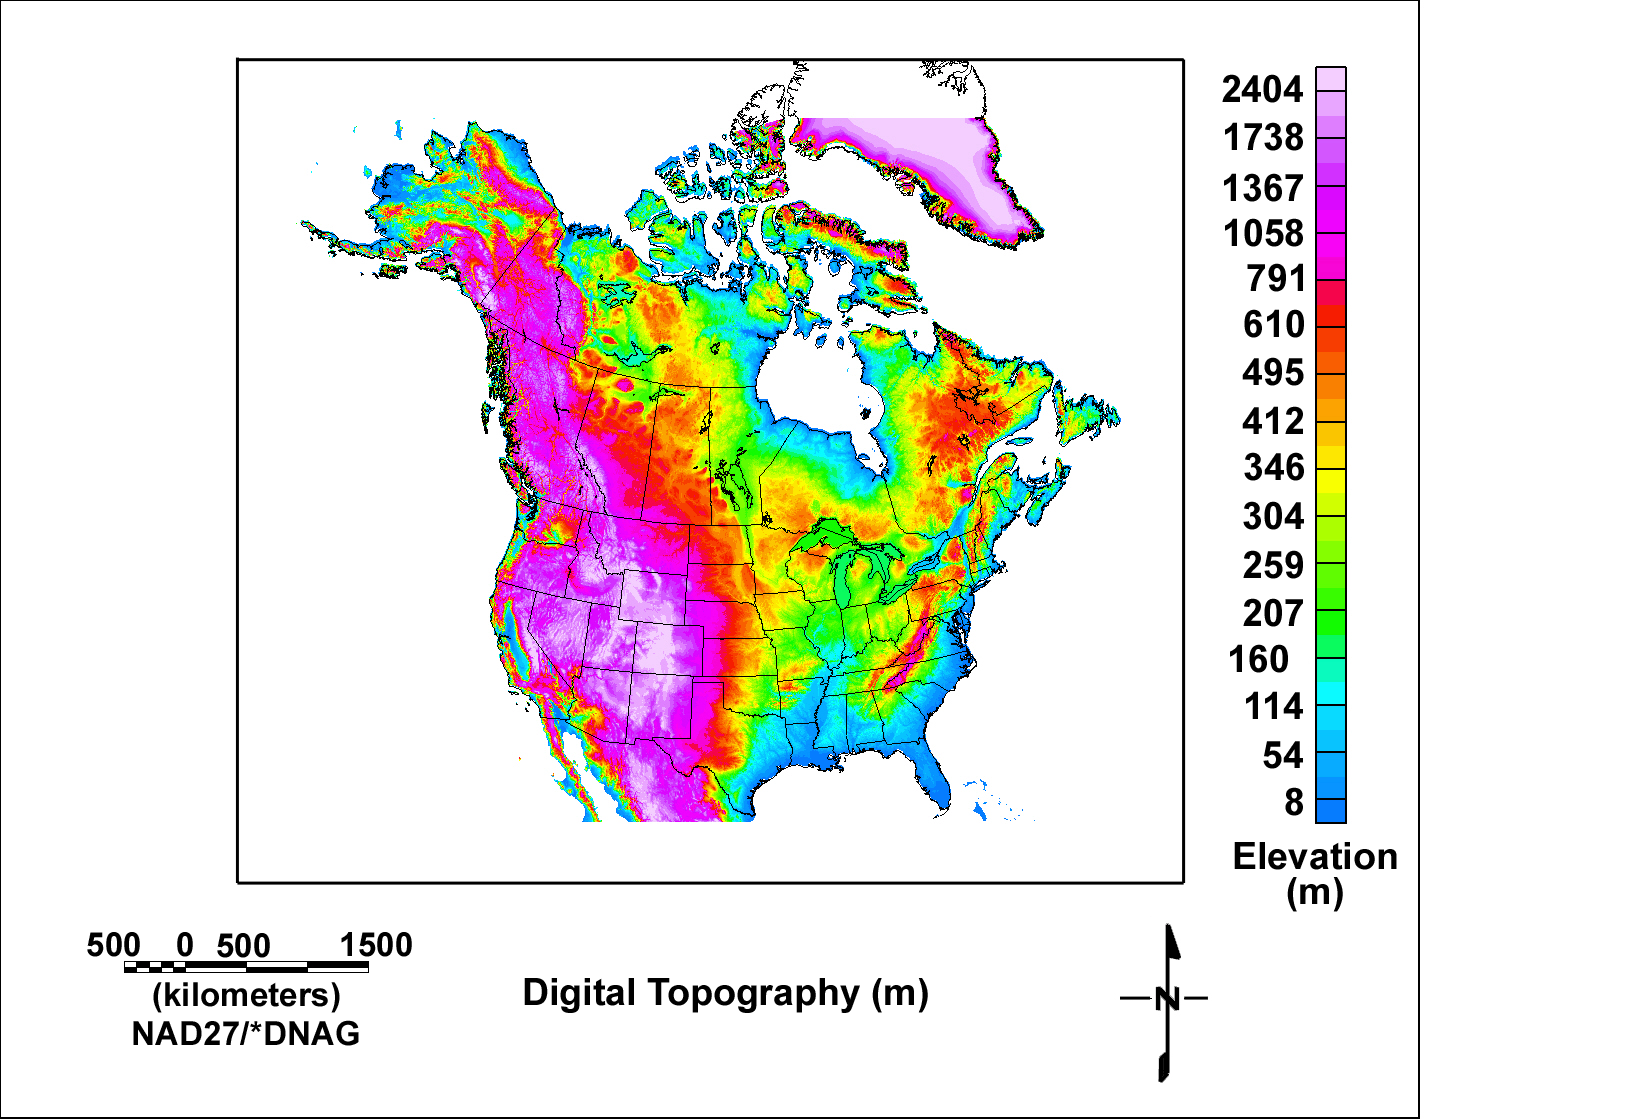 Full-resolution version of the topographic map.